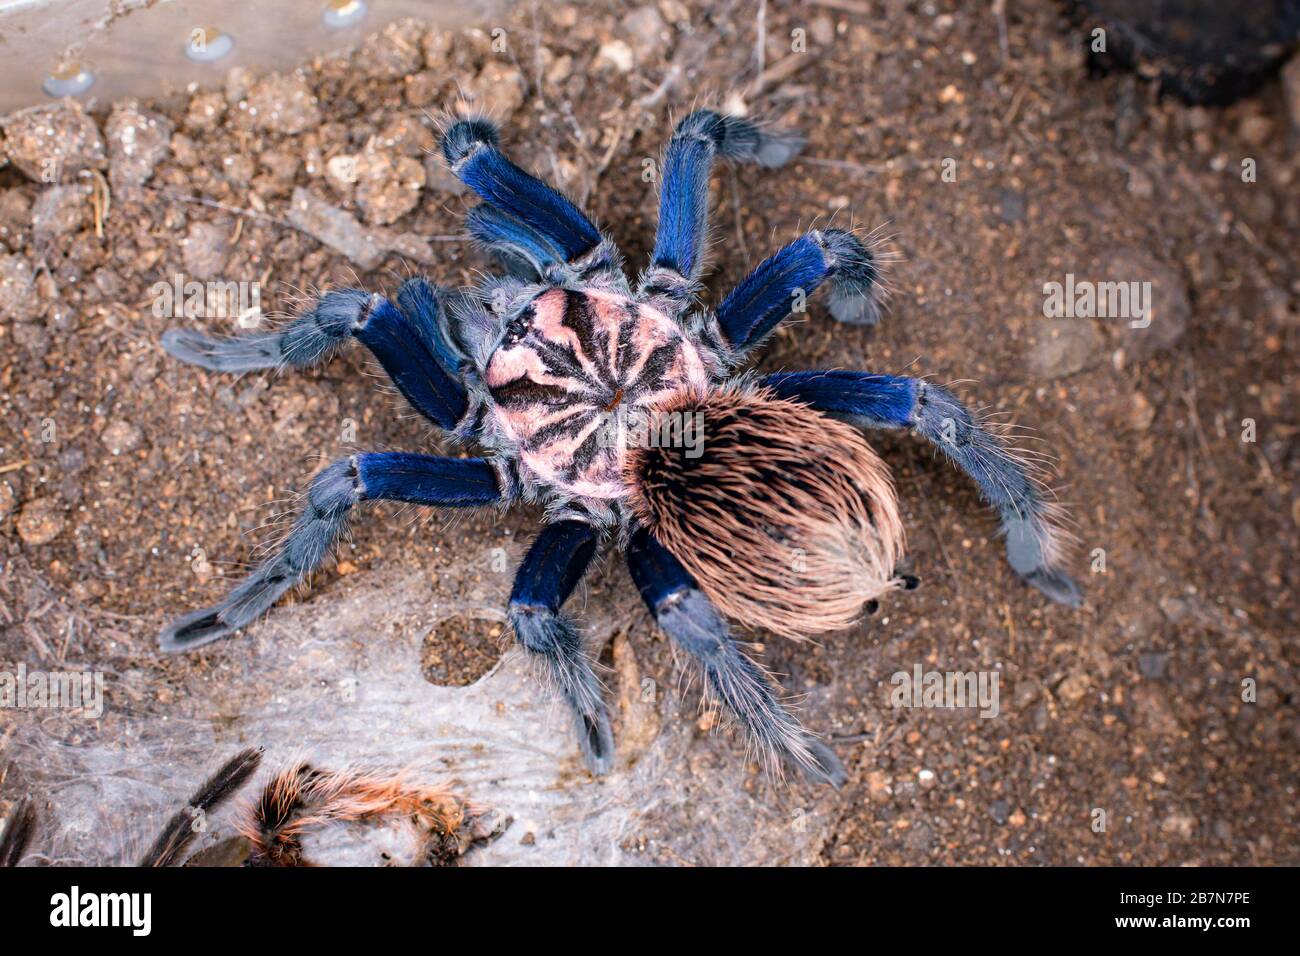 Xenesthis sp. Blue, One of the most colorful Theraphosidae spieces from Colombia, South America Stock Photo